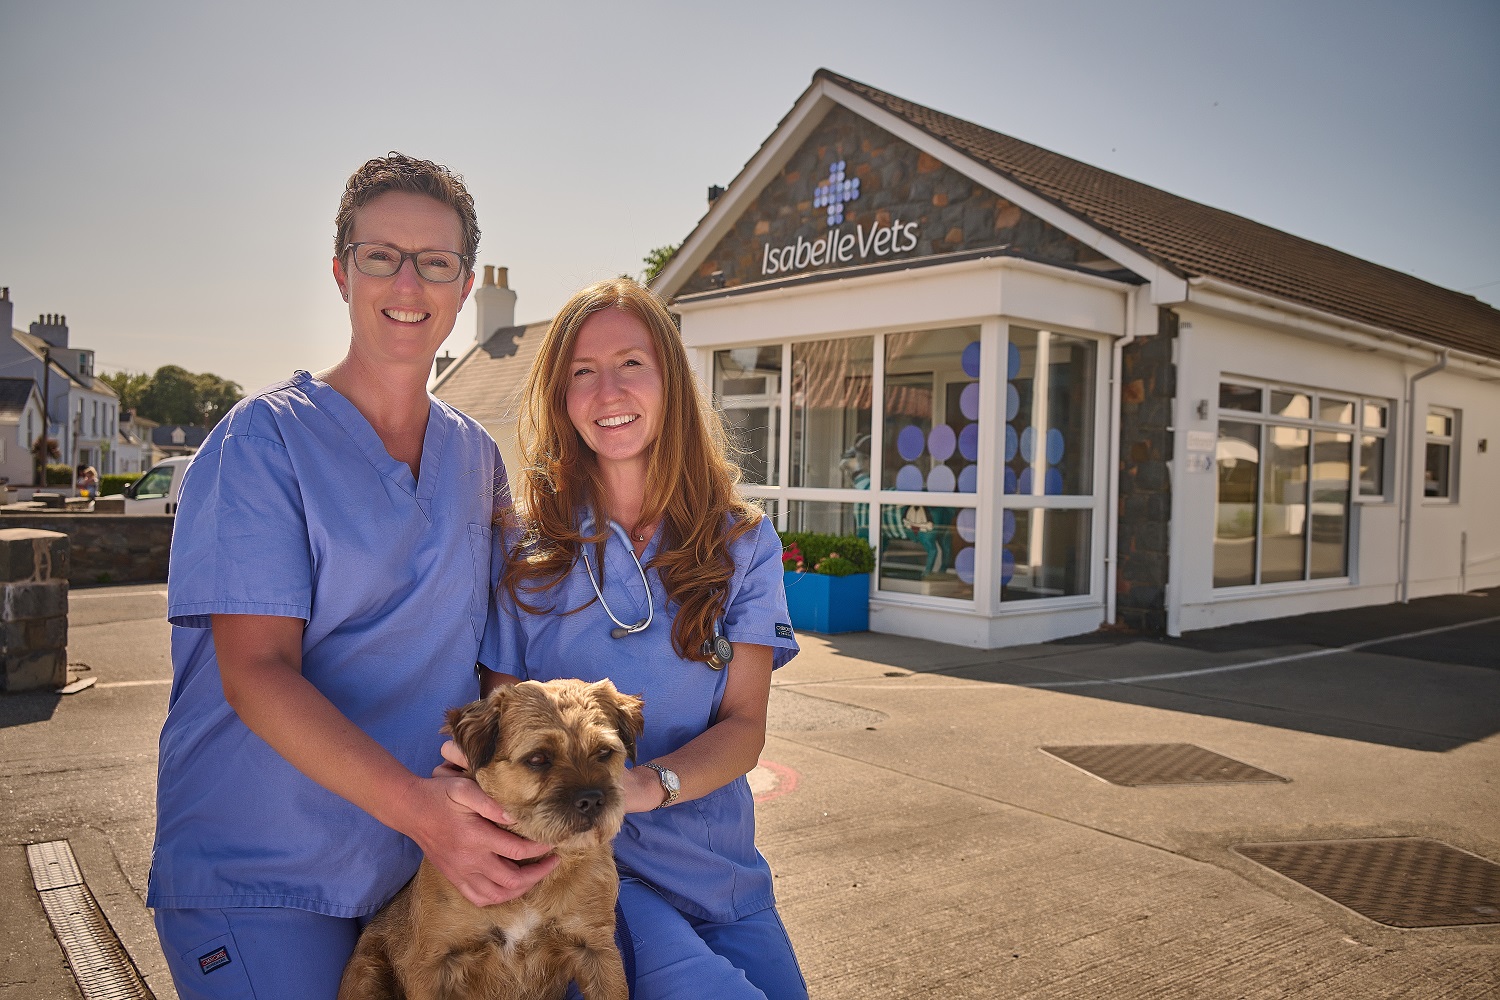 Exciting times ahead for Guernsey’s oldest veterinary practice